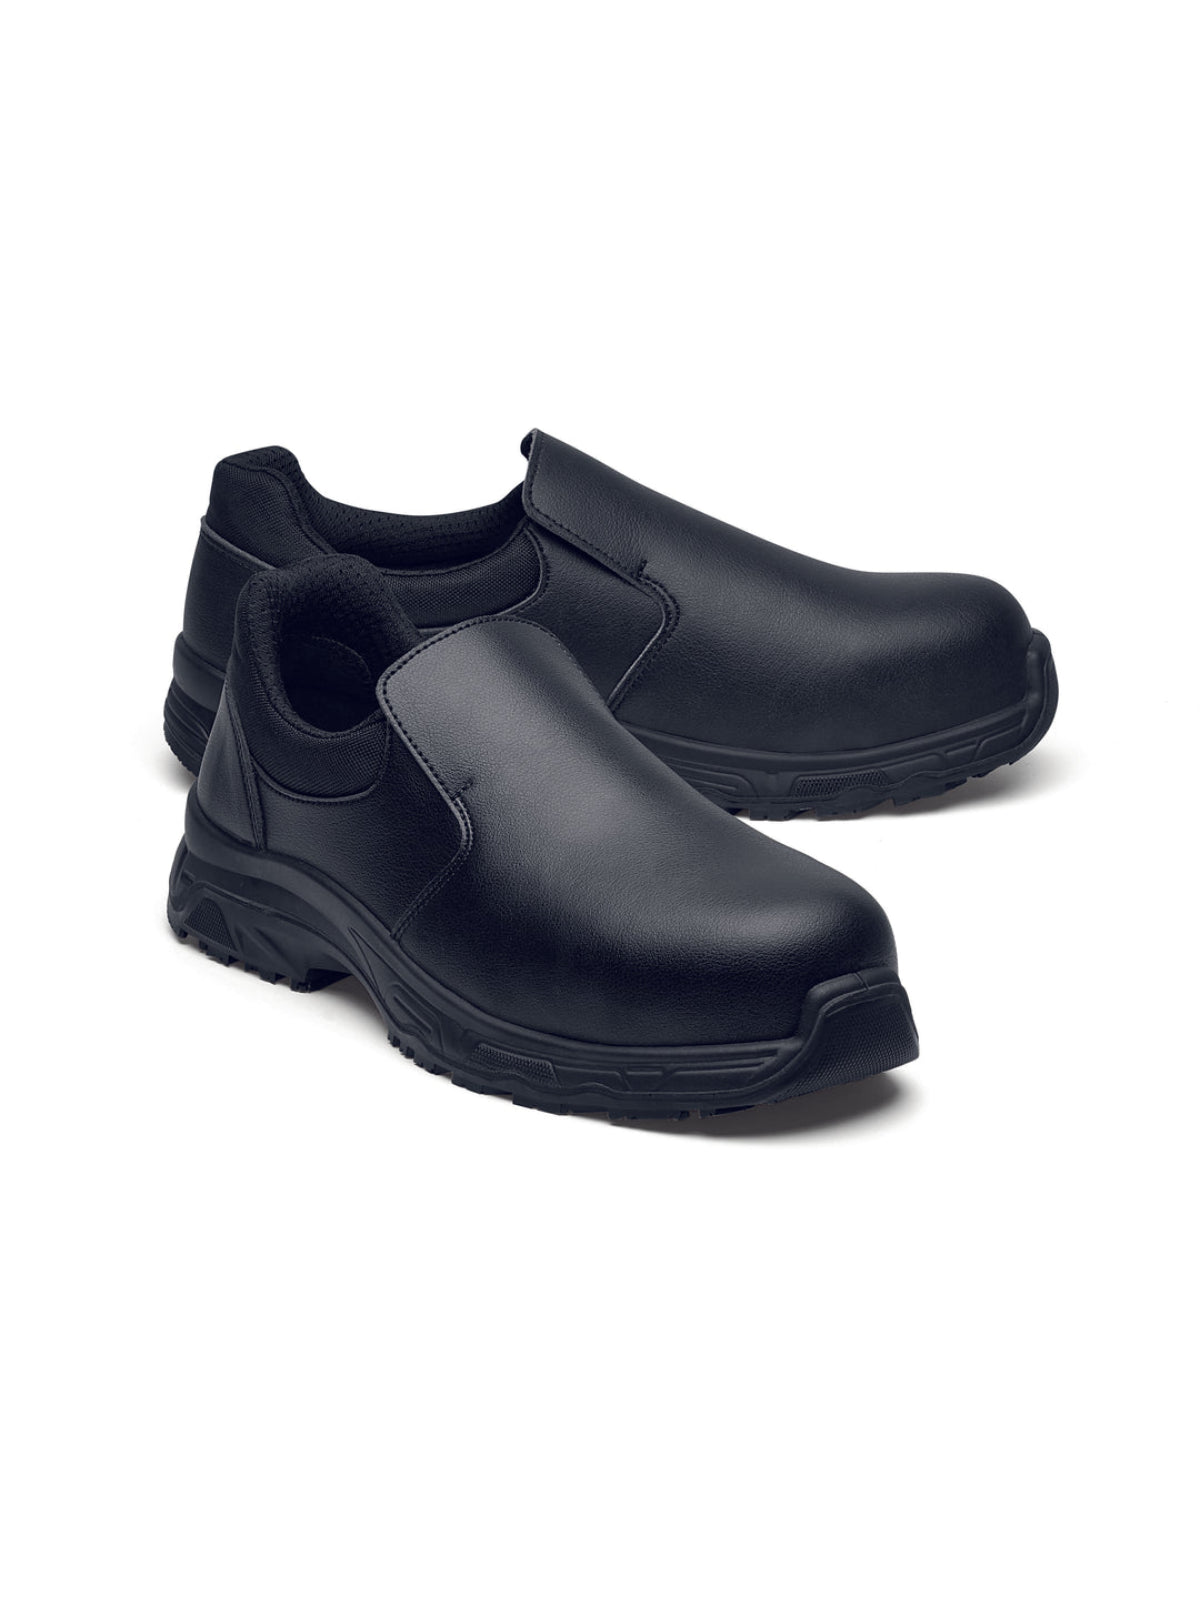 Unisex Safety Shoe Catania Black (S3) by Shoes For Crews -  ChefsCotton